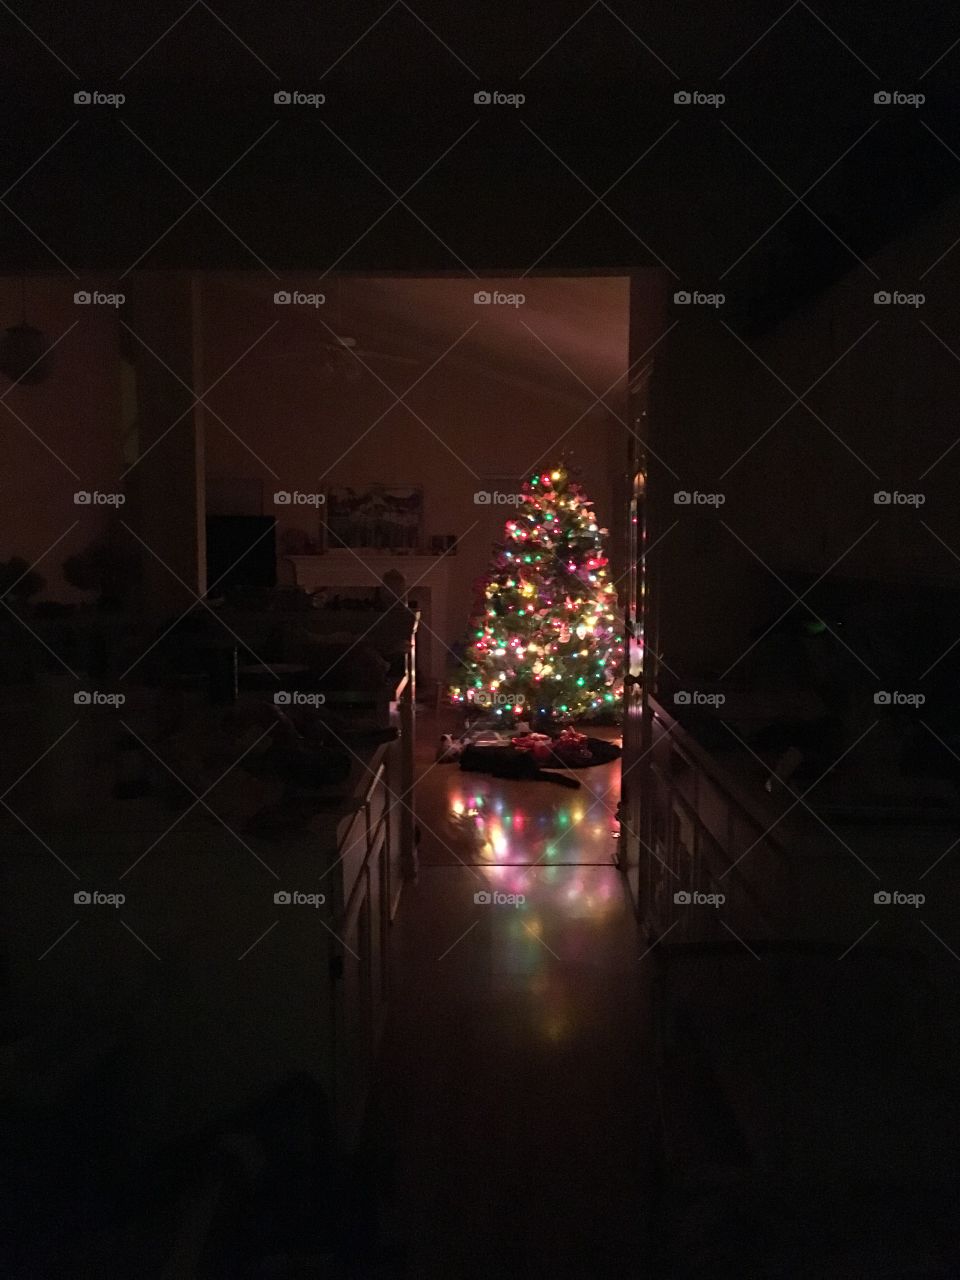 Not a creature was stirring